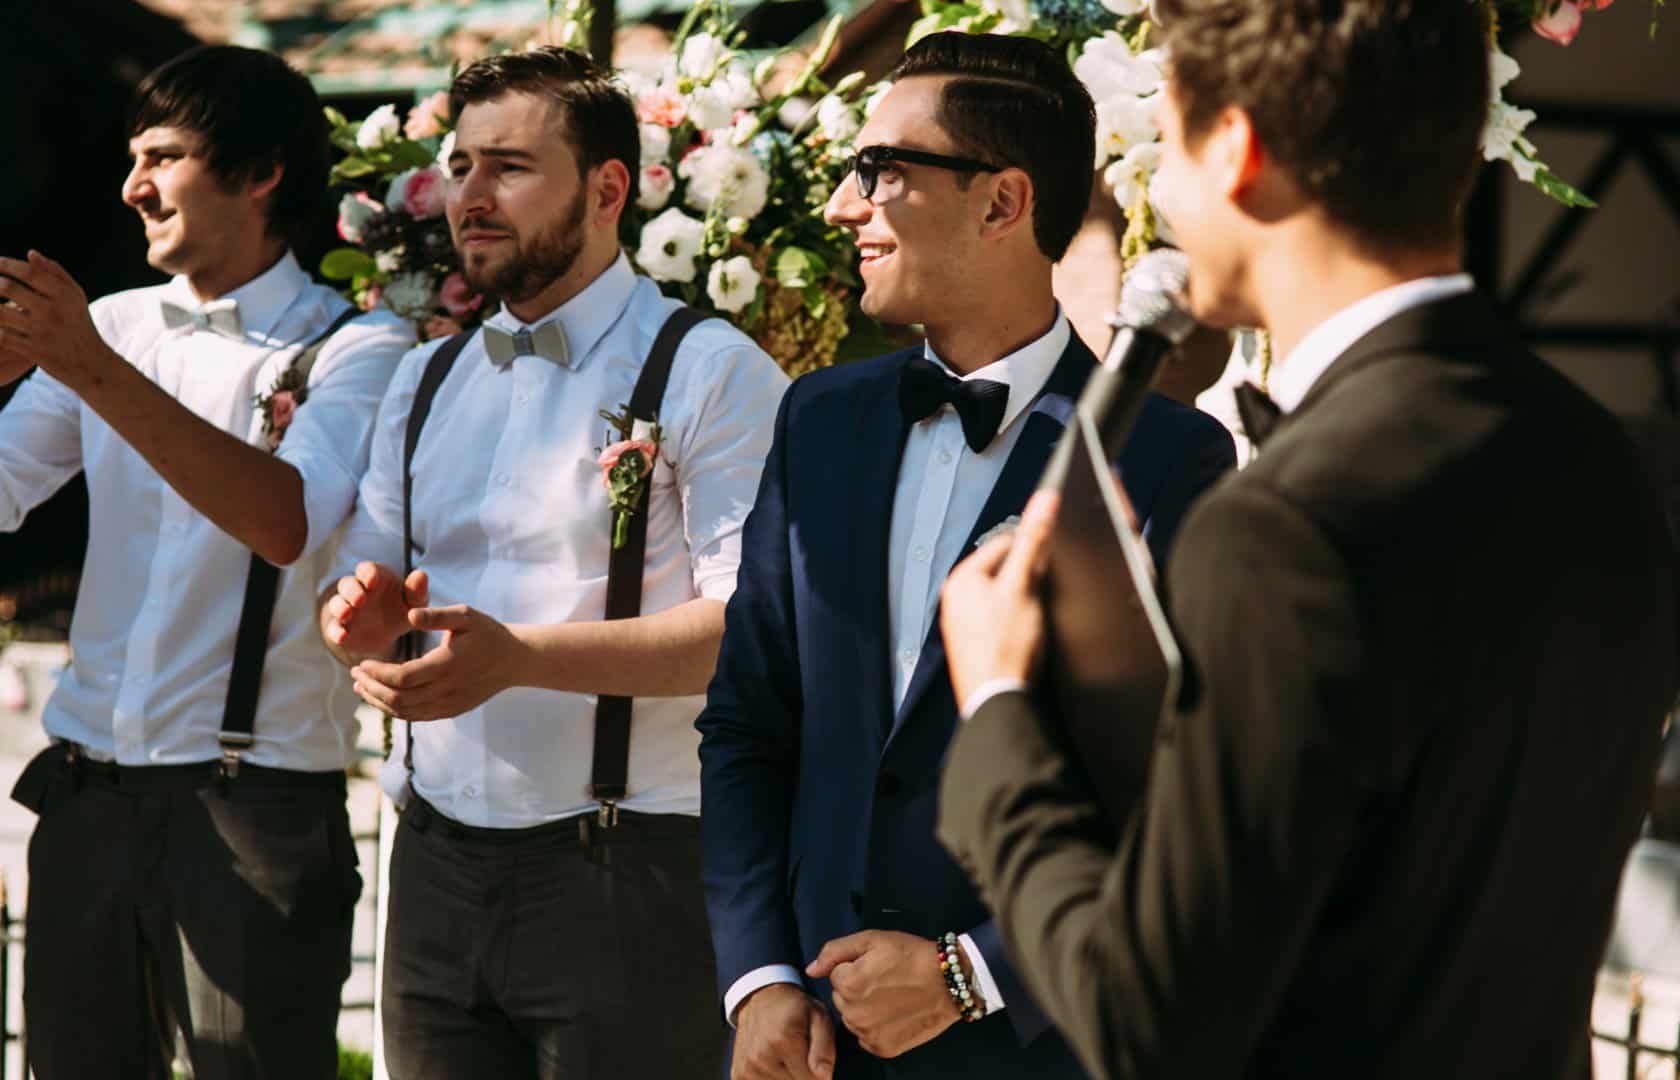 Best Man Duties: Don't Steal Bride! Do These Things Instead 51